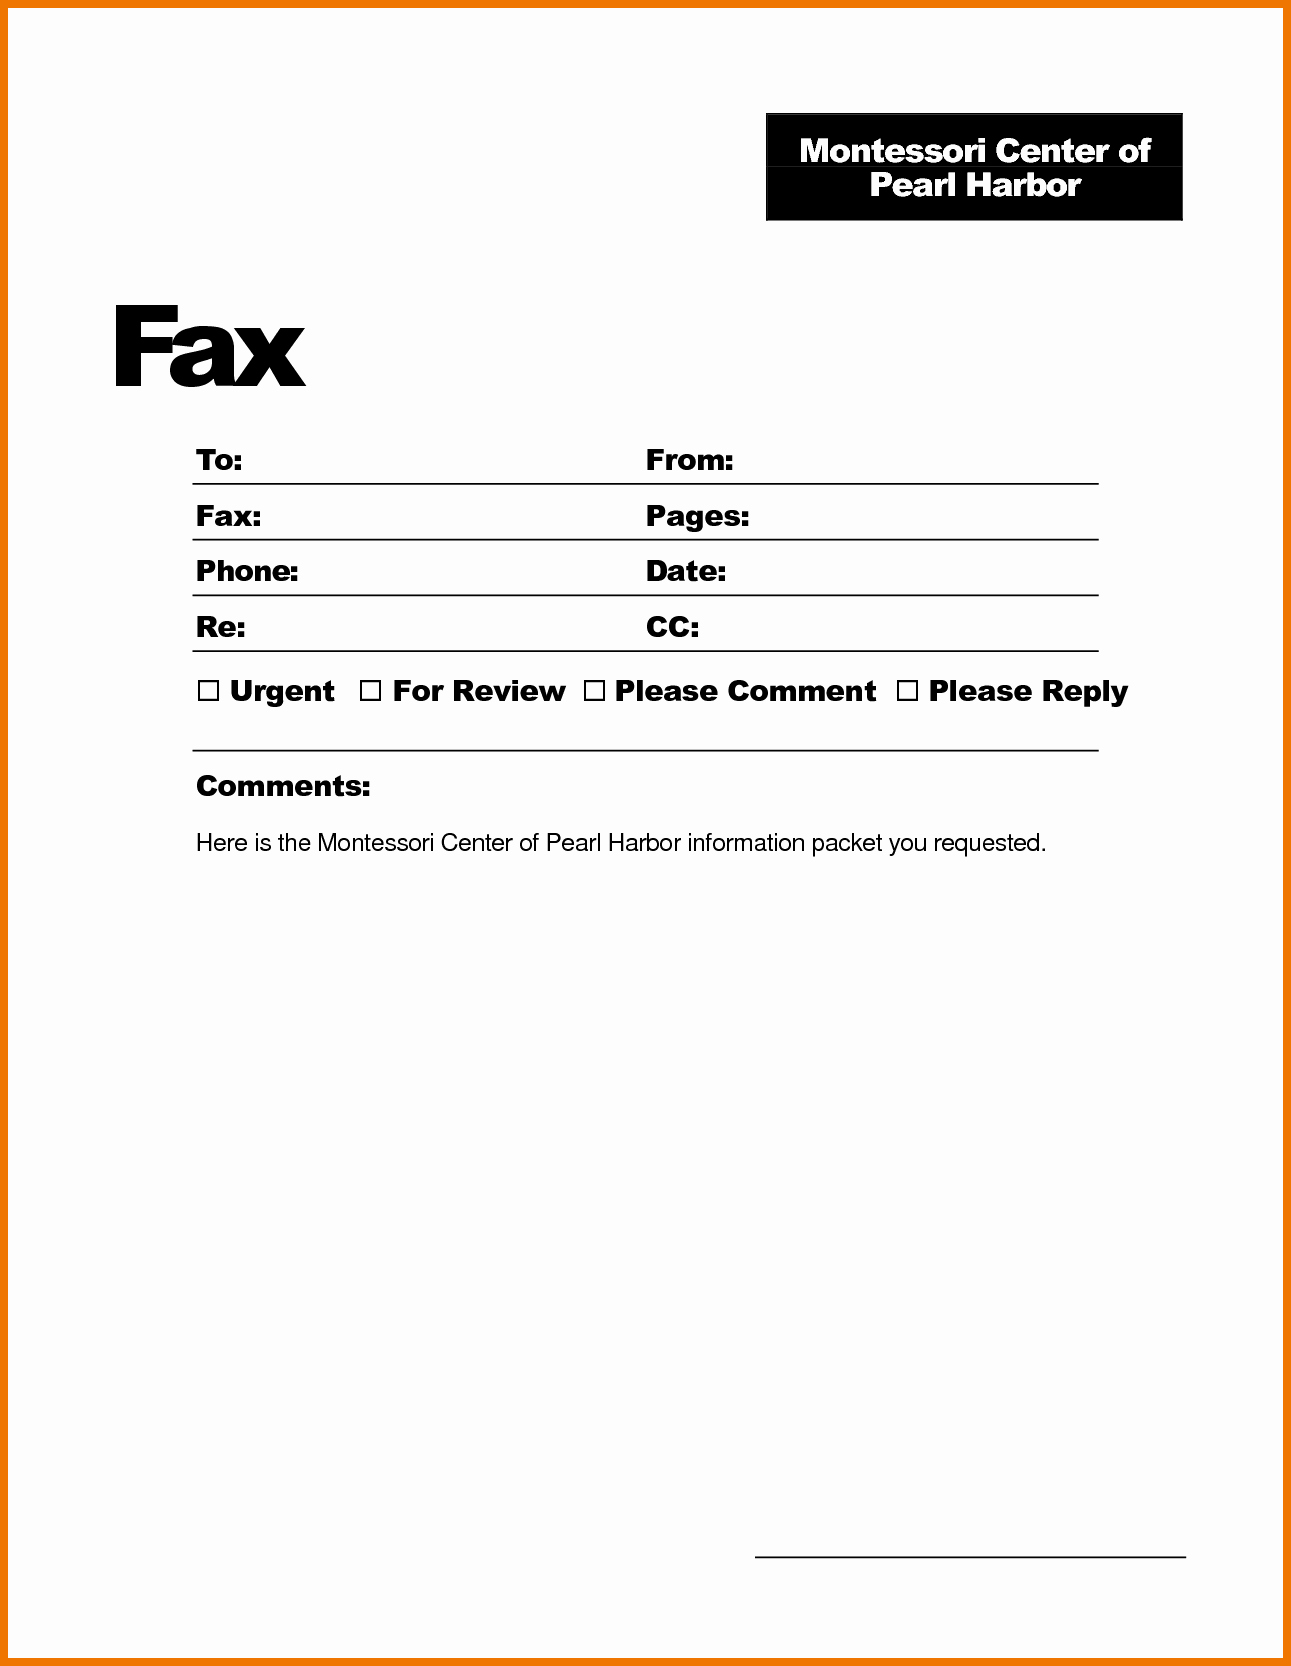 Samples Of Fax Cover Sheet Fresh Example Fax Cover Sheet Bamboodownunder